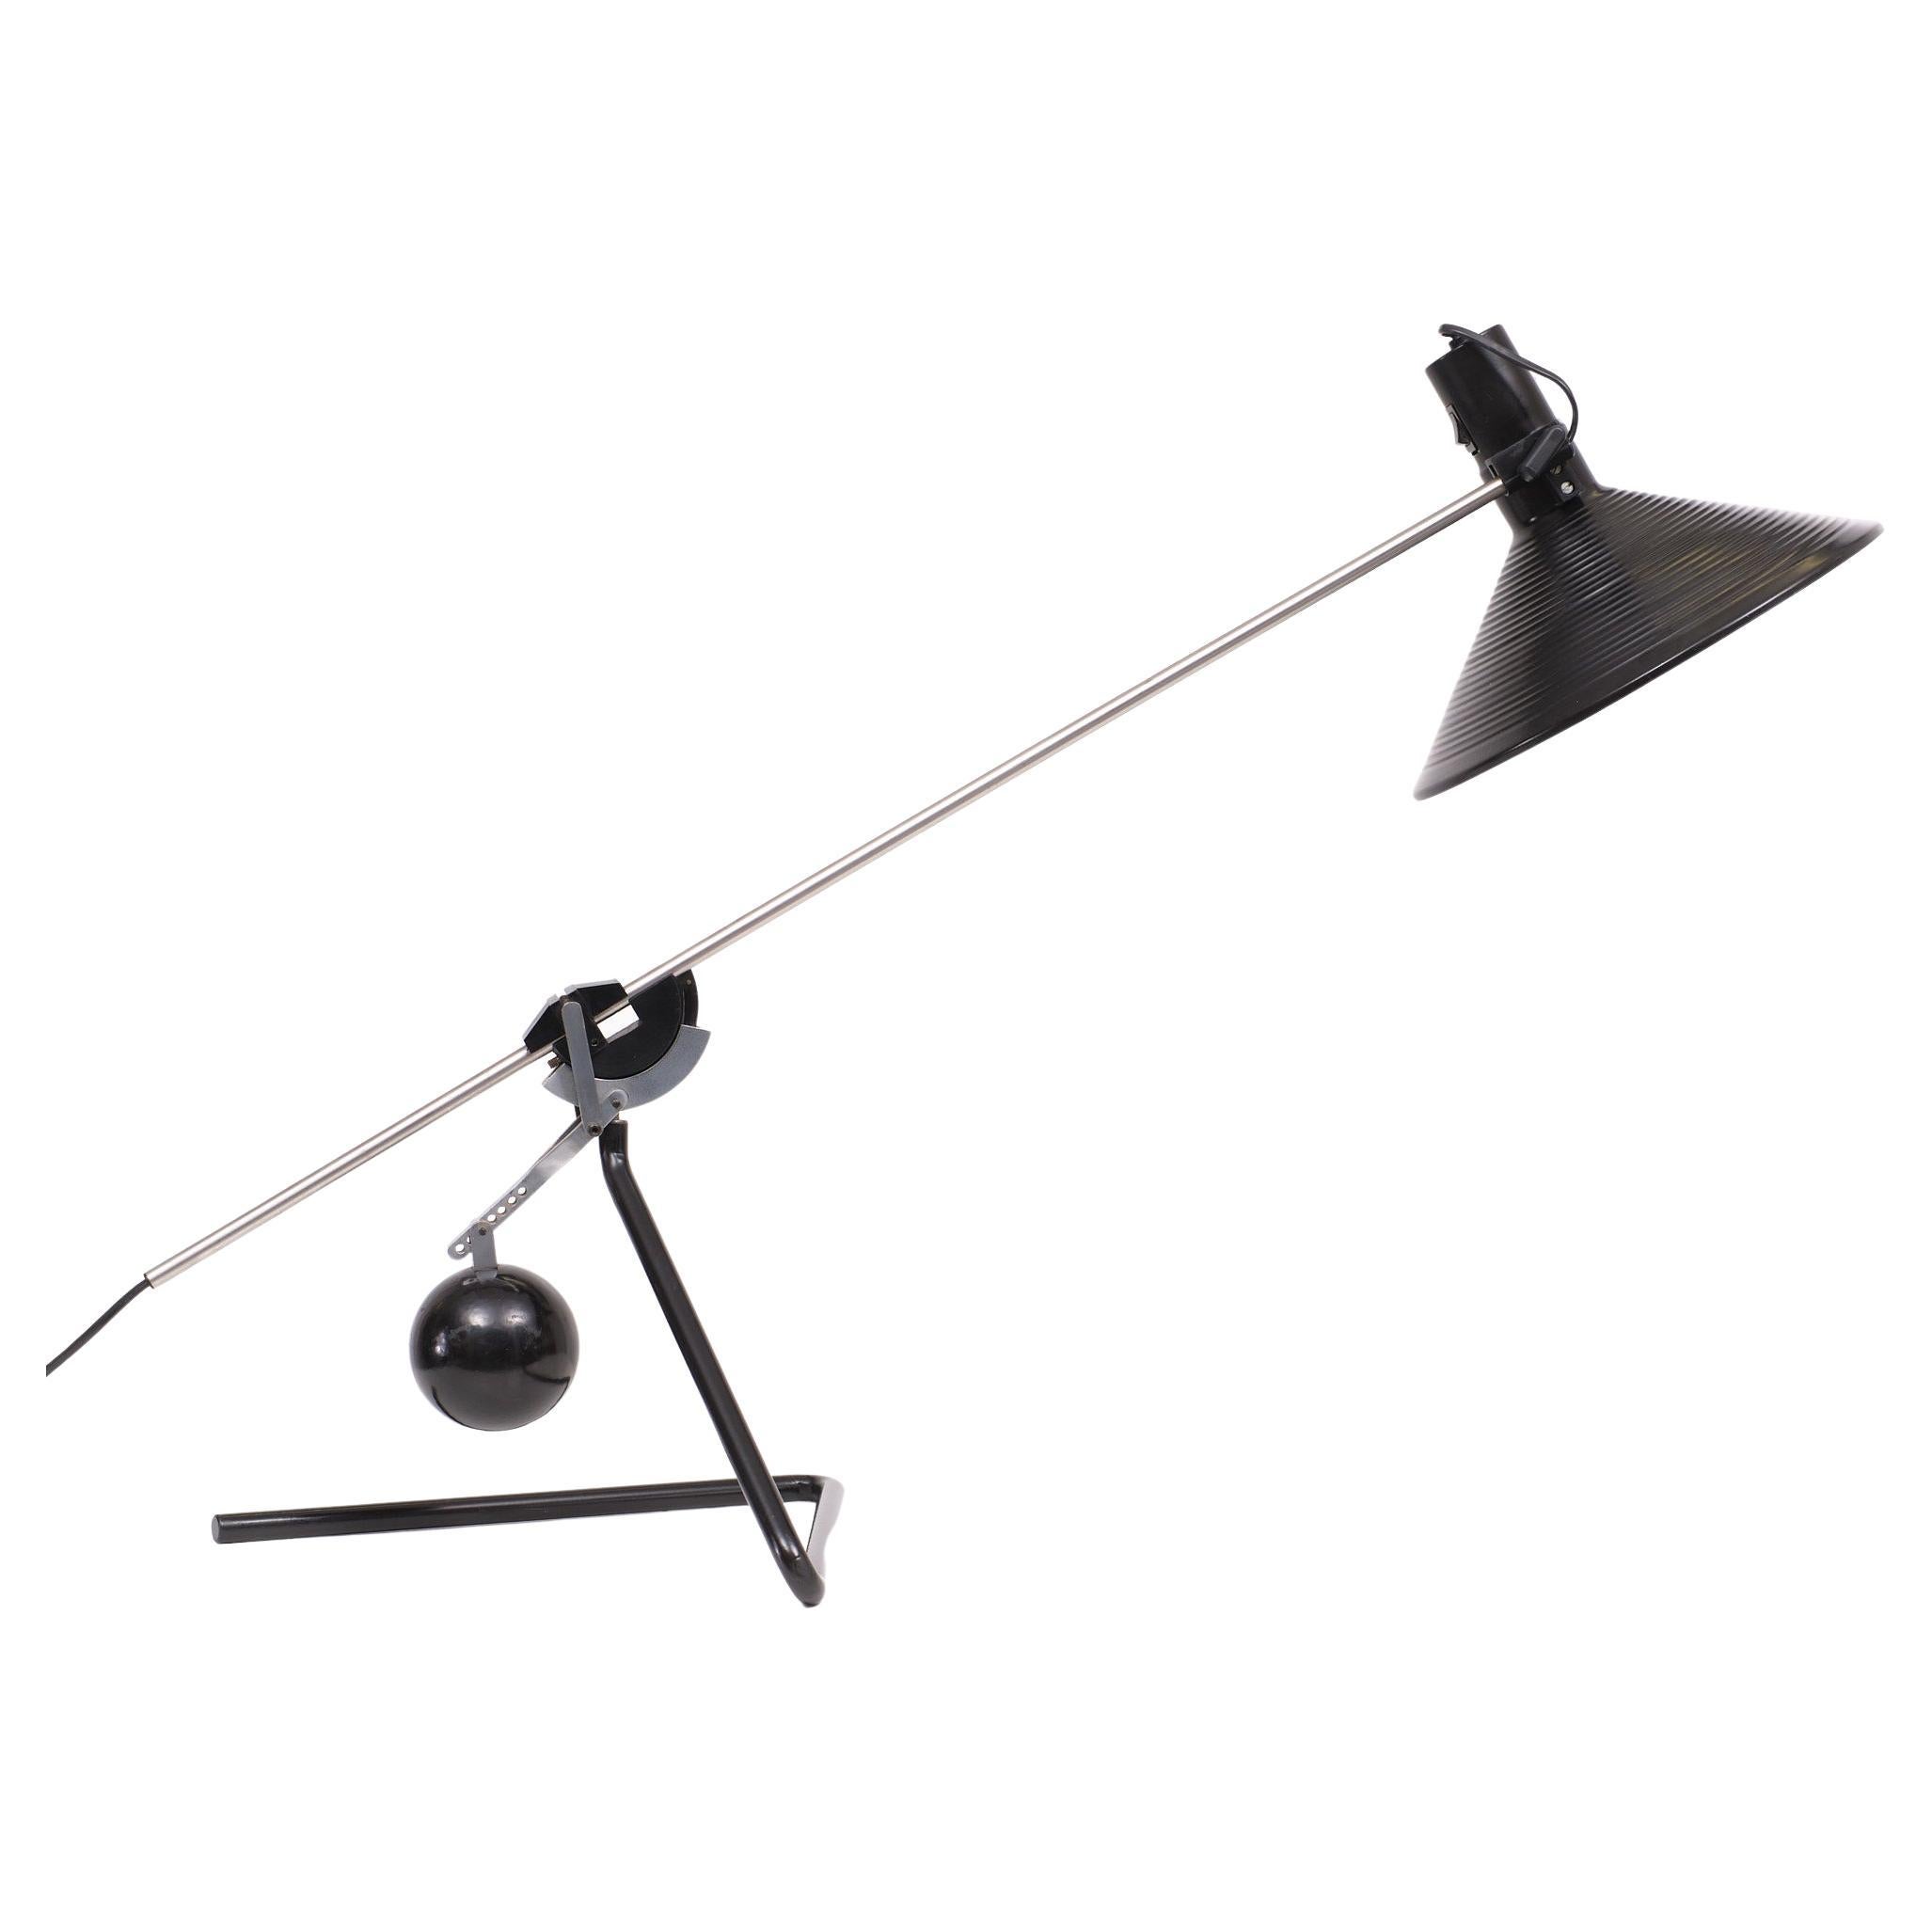 Stunning large Post Modern Desk lamp. Counter Weight using a solid Steel ball 
to move in every direction. Nice architectural design. Switch on the shade.
one large E27 bulb needed. Rare piece. Attributed to Albert Sonneman USA.